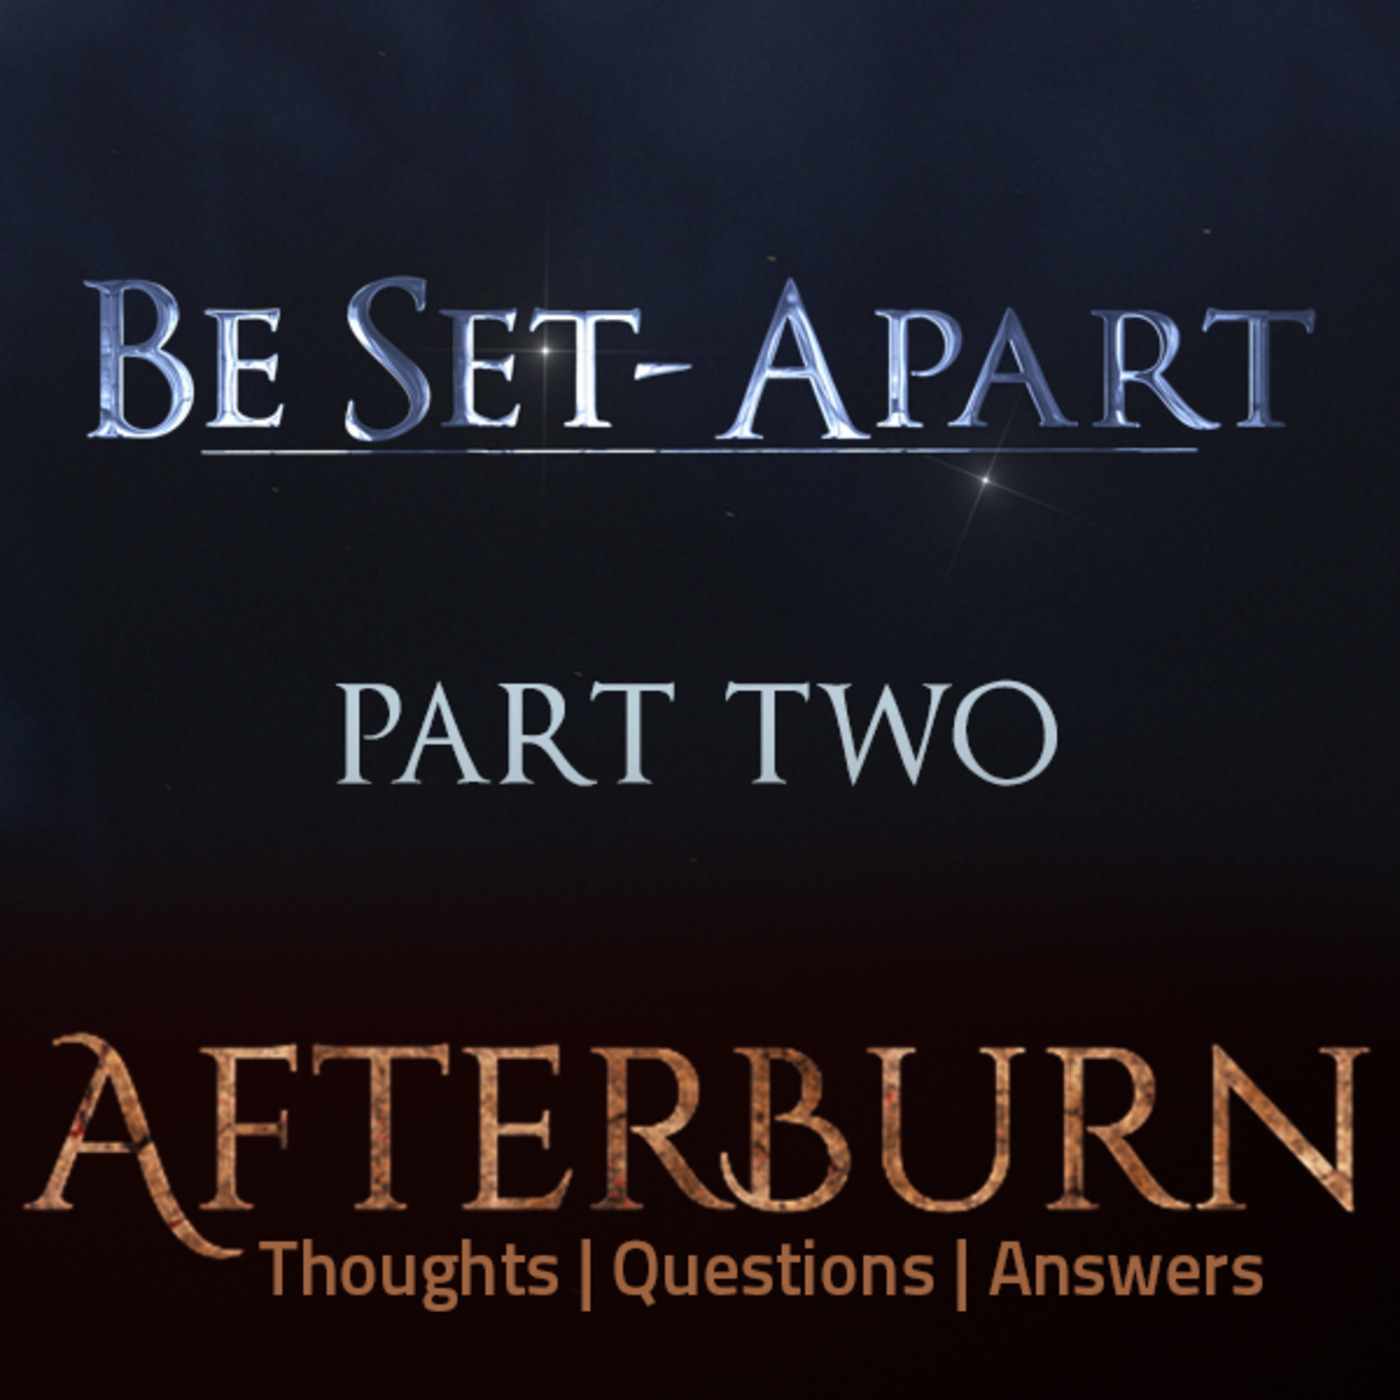 Episode 758: Afterburn | Thoughts, Q&A on Be Set-Apart | Part Two